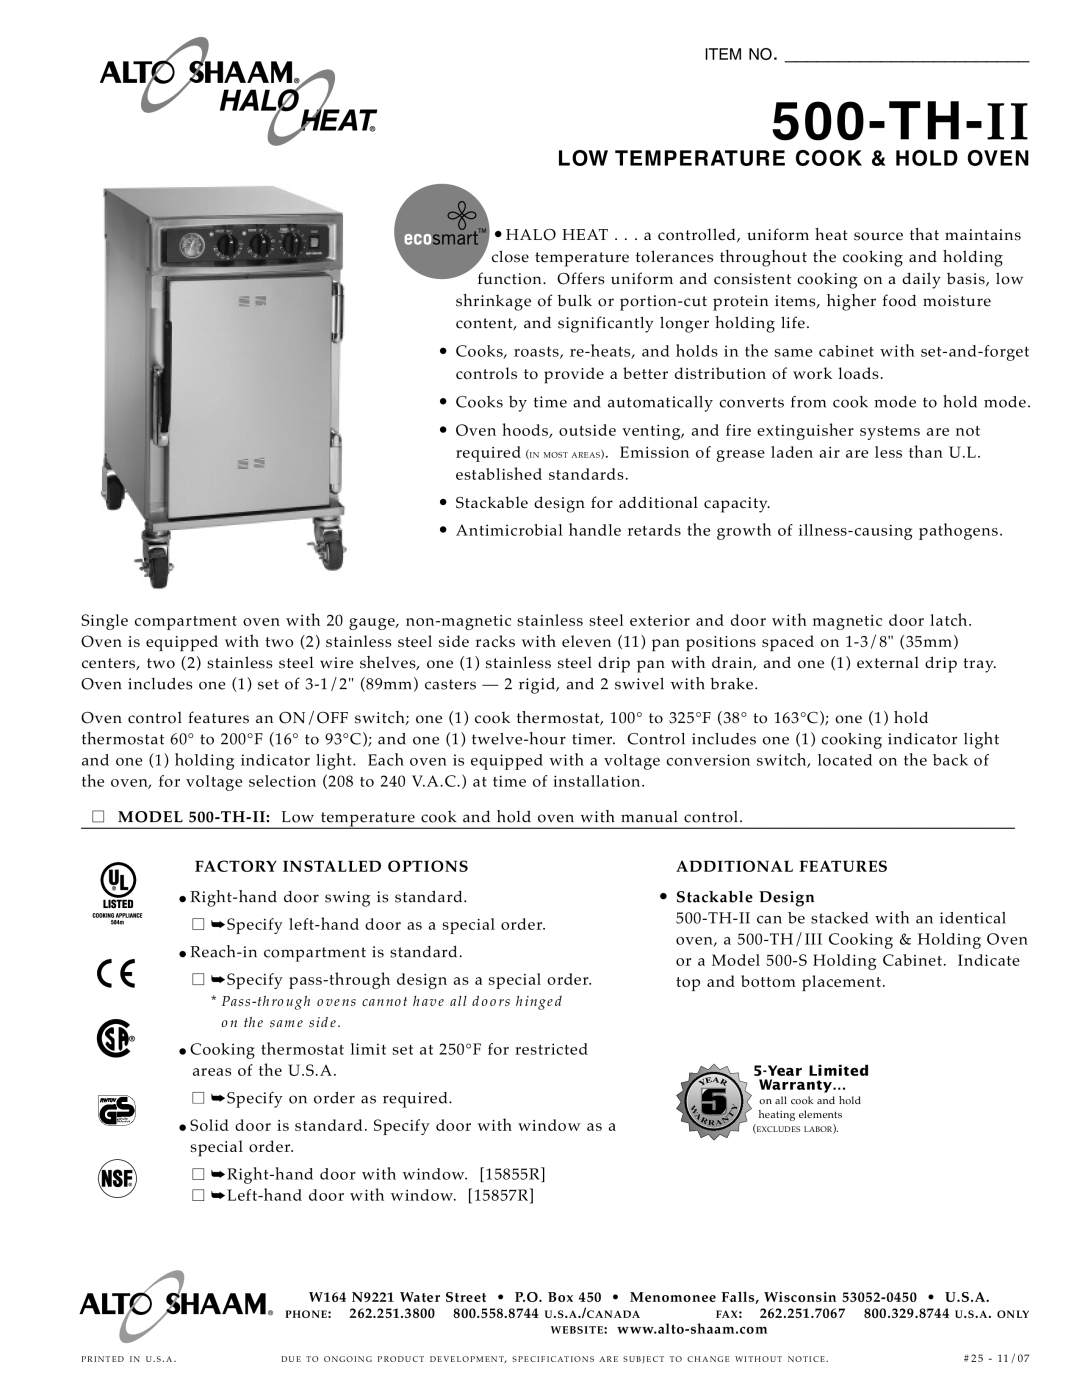 Alto-Shaam 500-TH-II specifications Th-Ii, Low Temperature Cook & Hold Oven, Factory Install Ed Options, Item No 